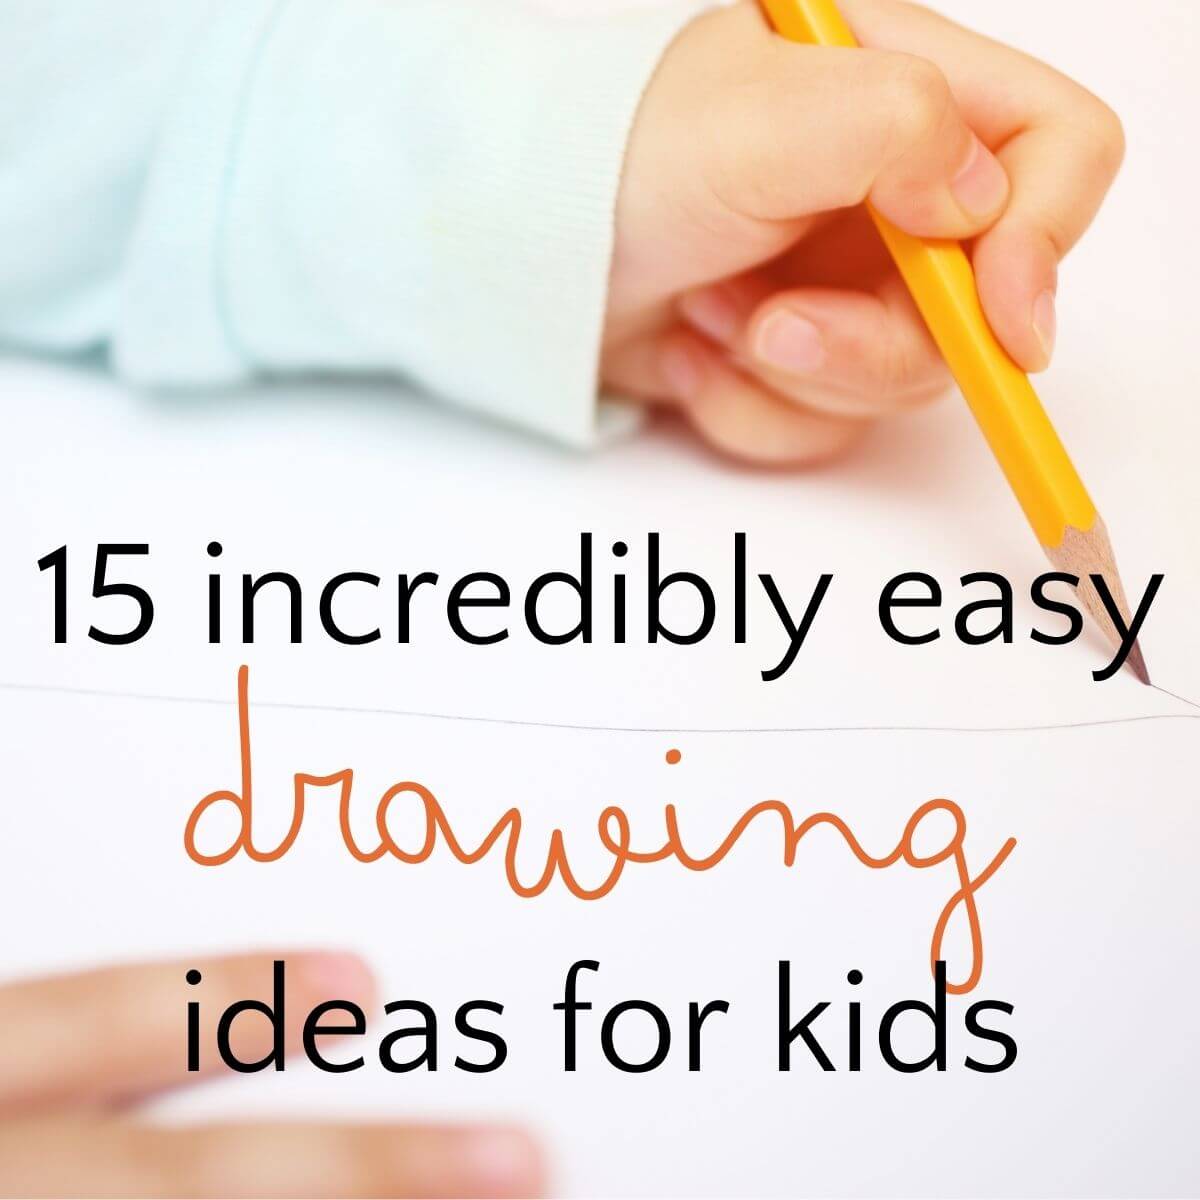 15 Incredibly Easy Drawing Ideas for Kids